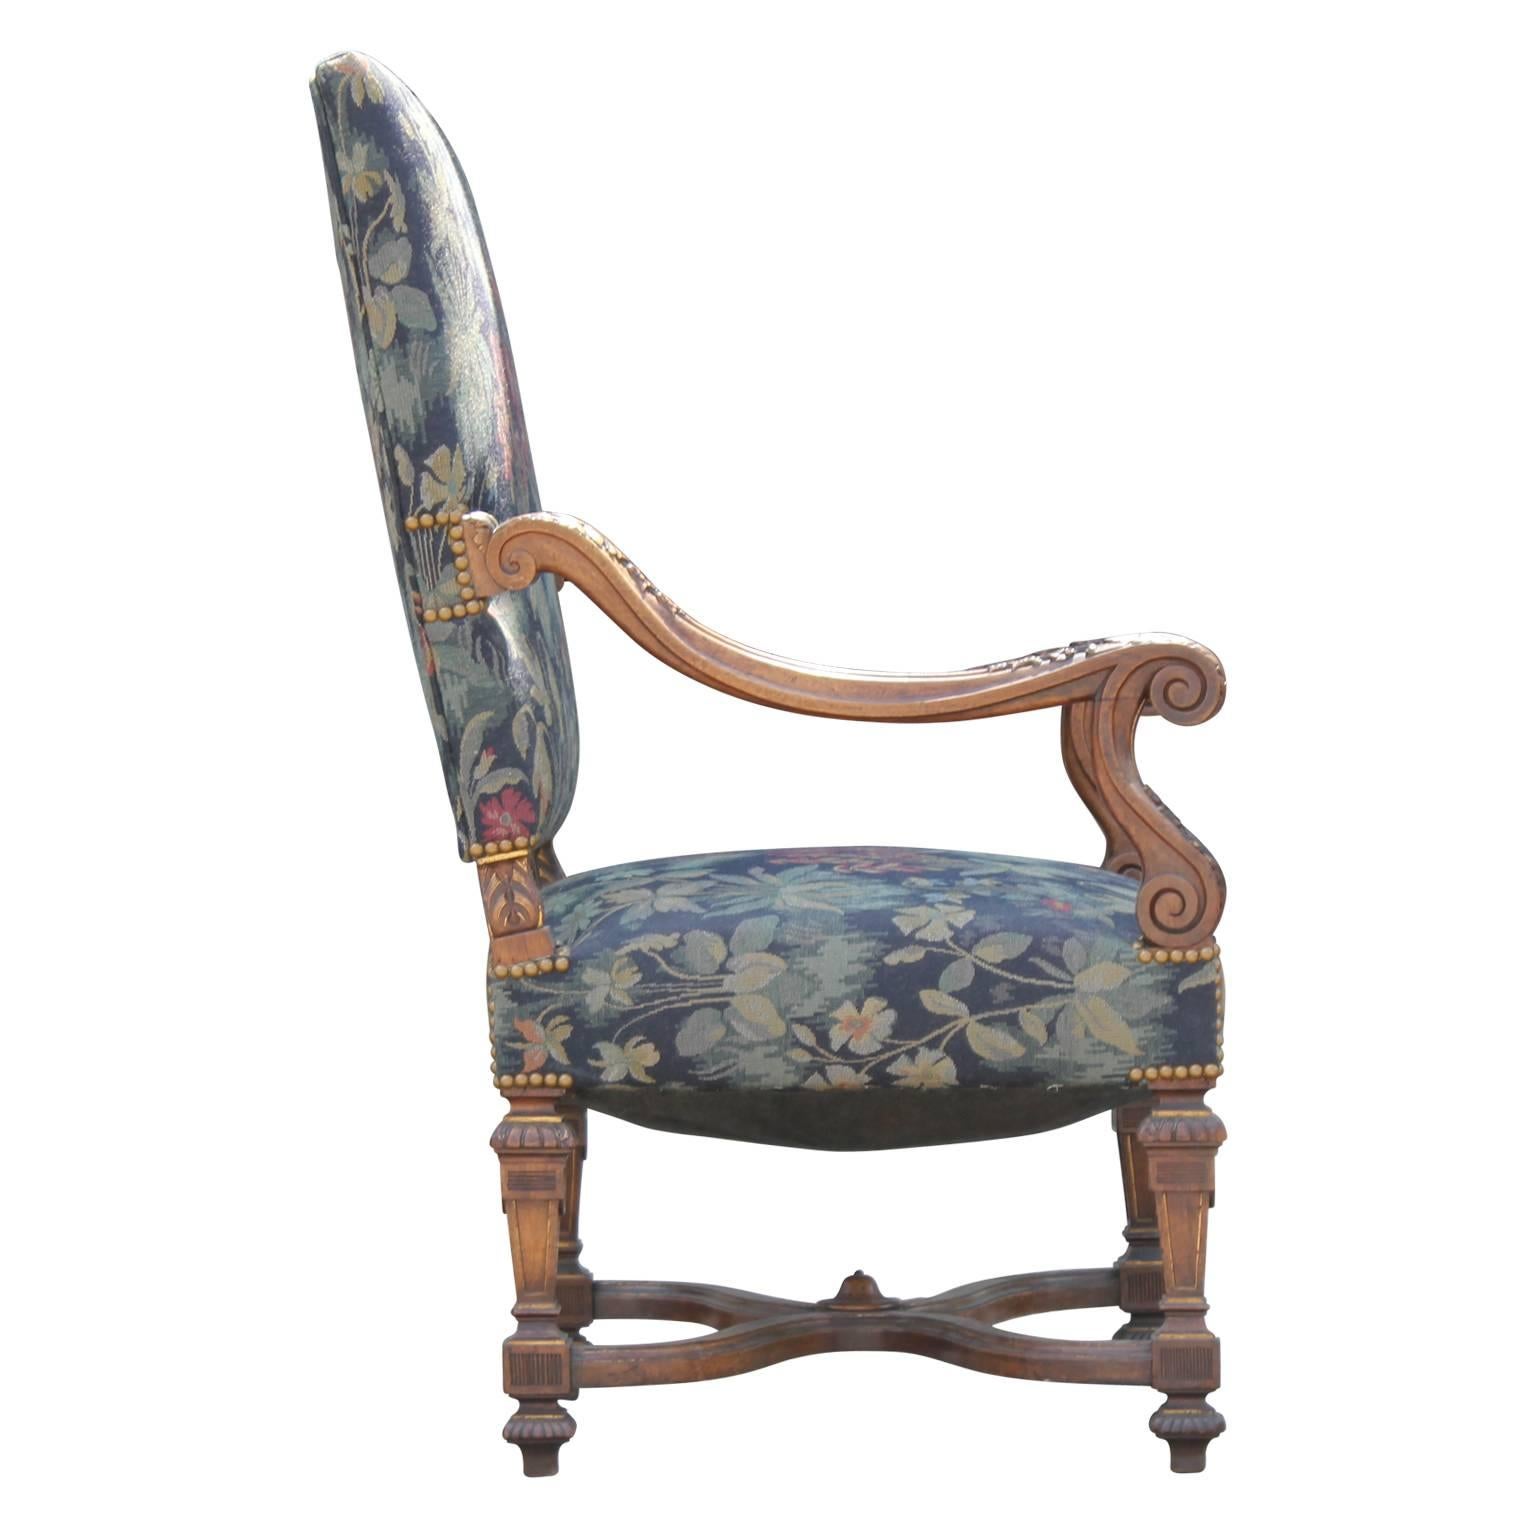 Great Pair of early French Louis XVI highly-carved walnut armchairs. The chair frames are in excellent shape. The fabric is decent but new upholstery is recommended. 
These are very high quality chairs and will not disappoint.